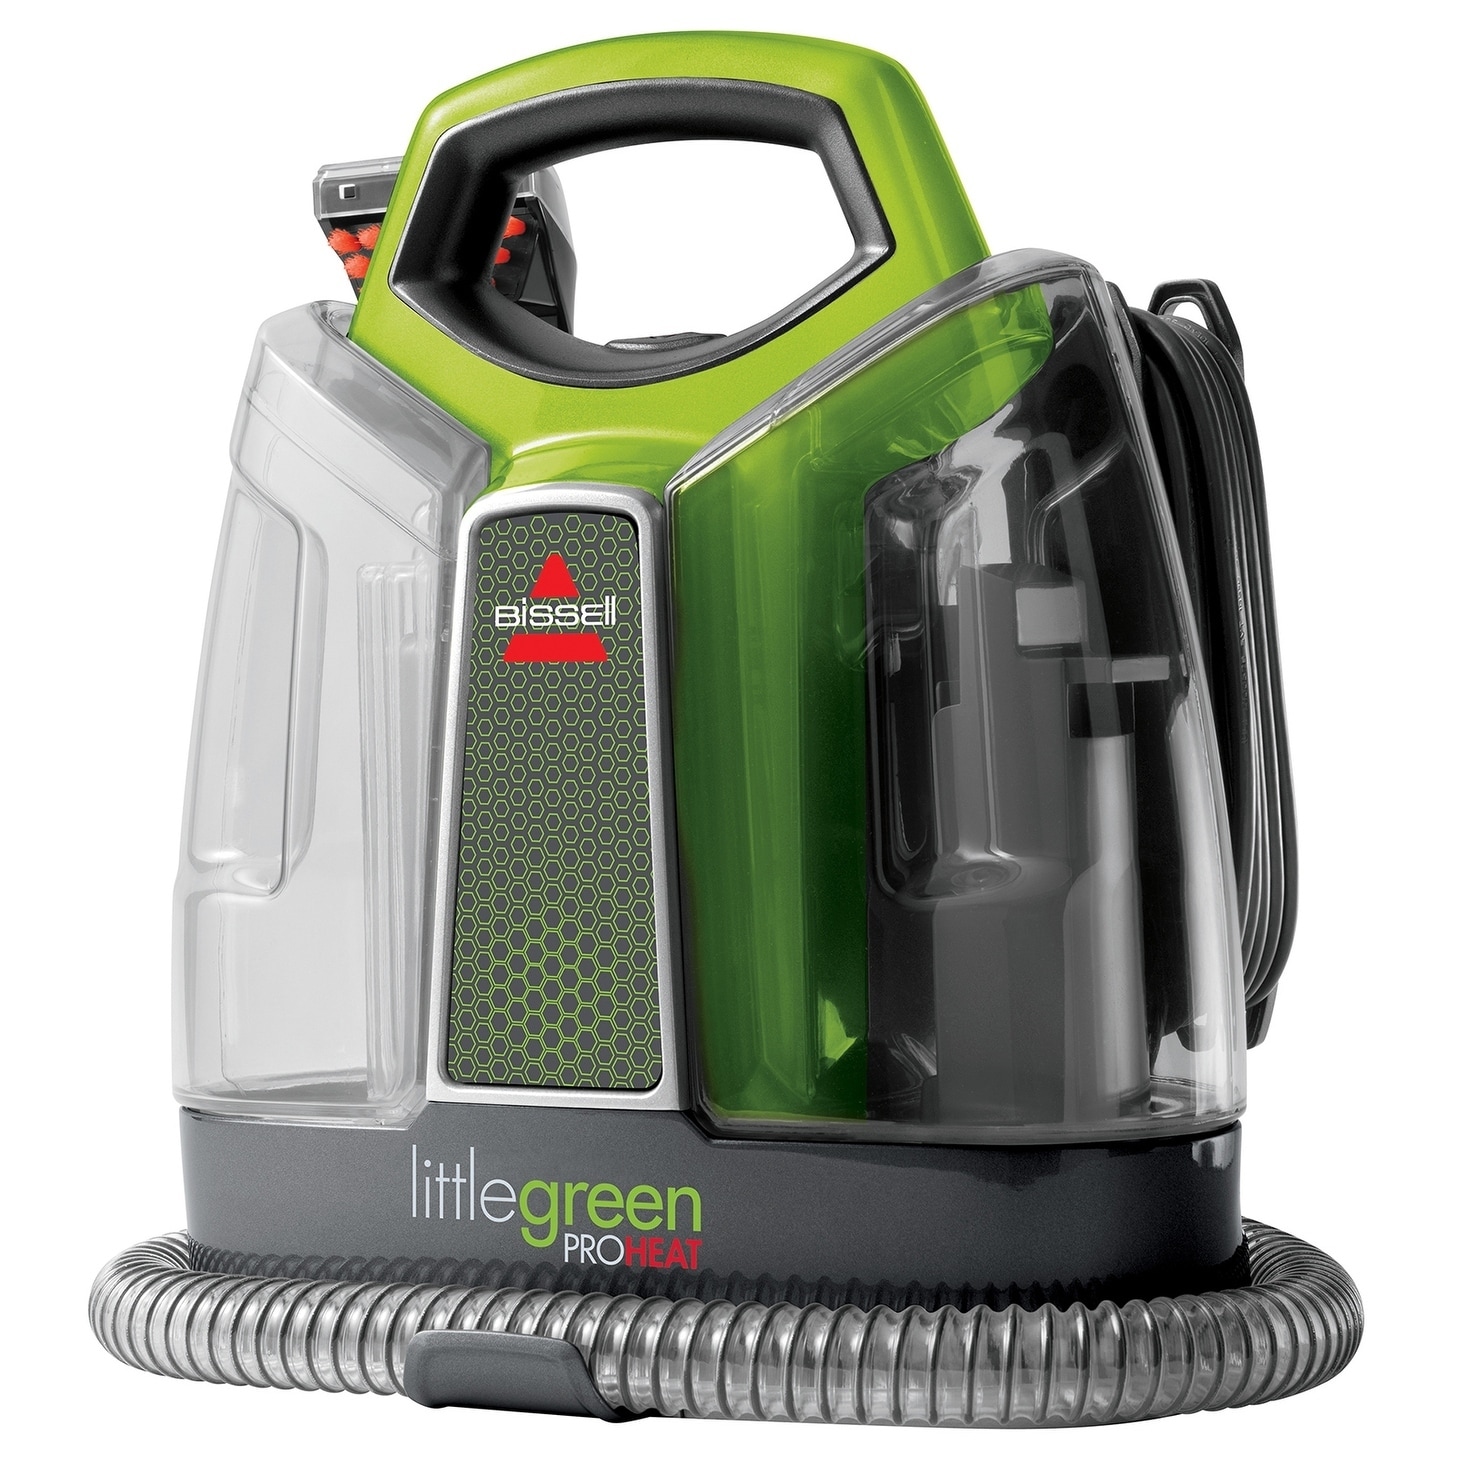 Bissell 2513G Little Green ProHeat Portable Carpet Cleaner